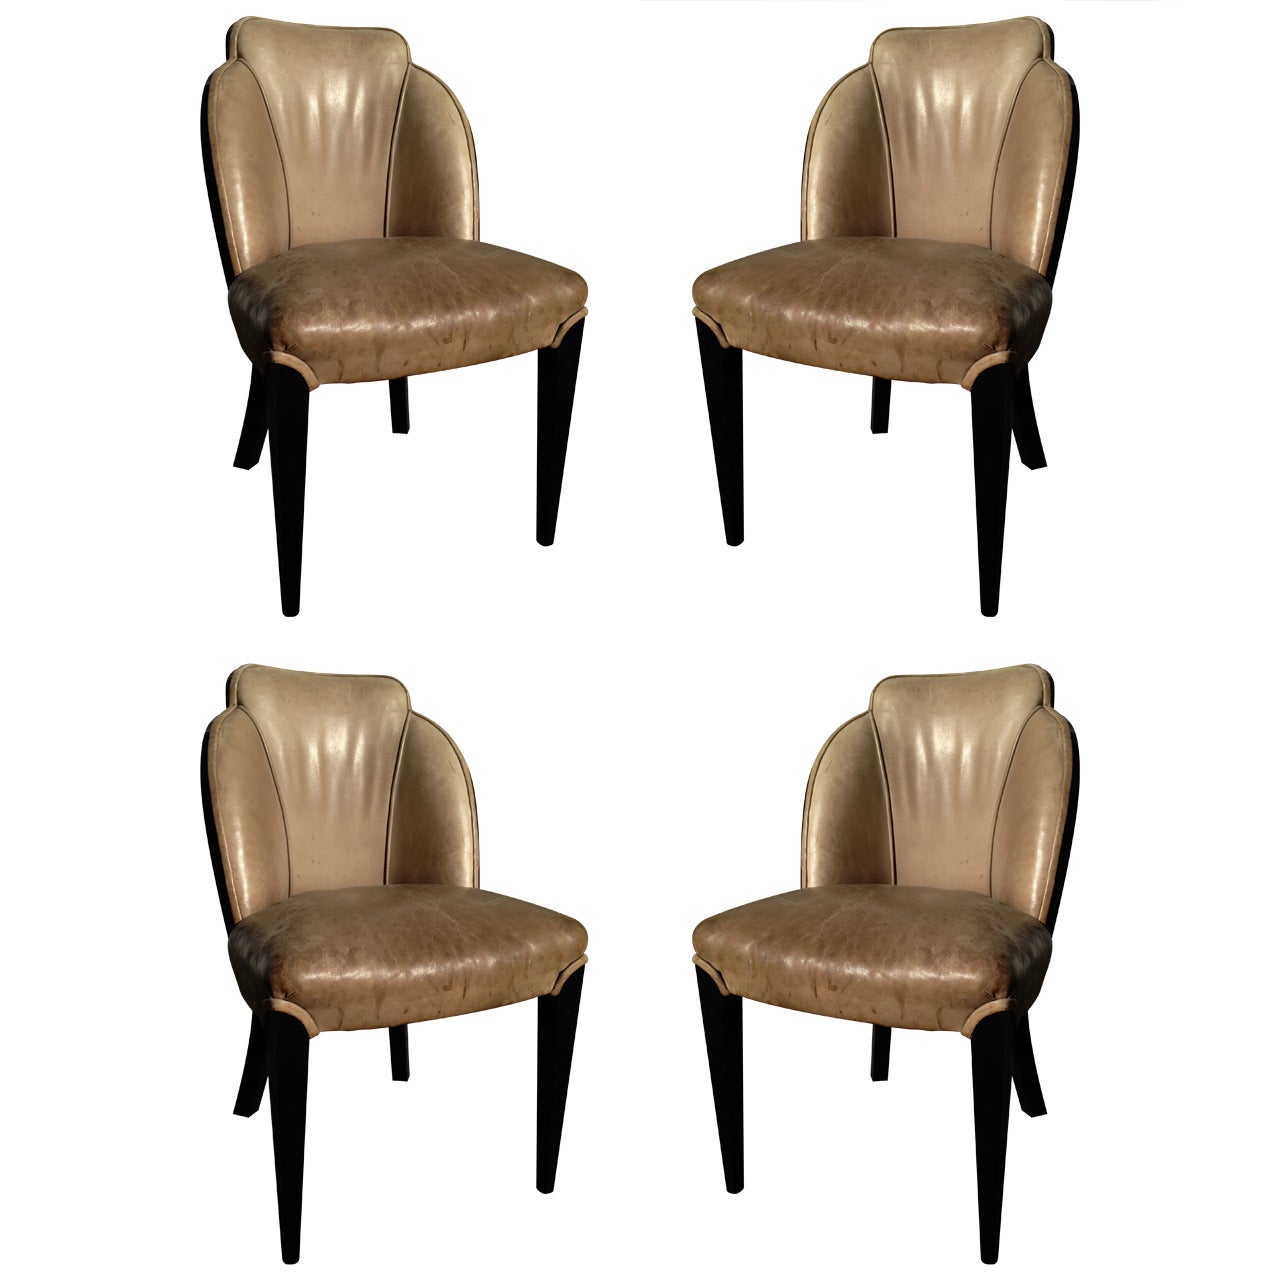 TWO Pairs of Period Art Deco Ebonized Side Chairs